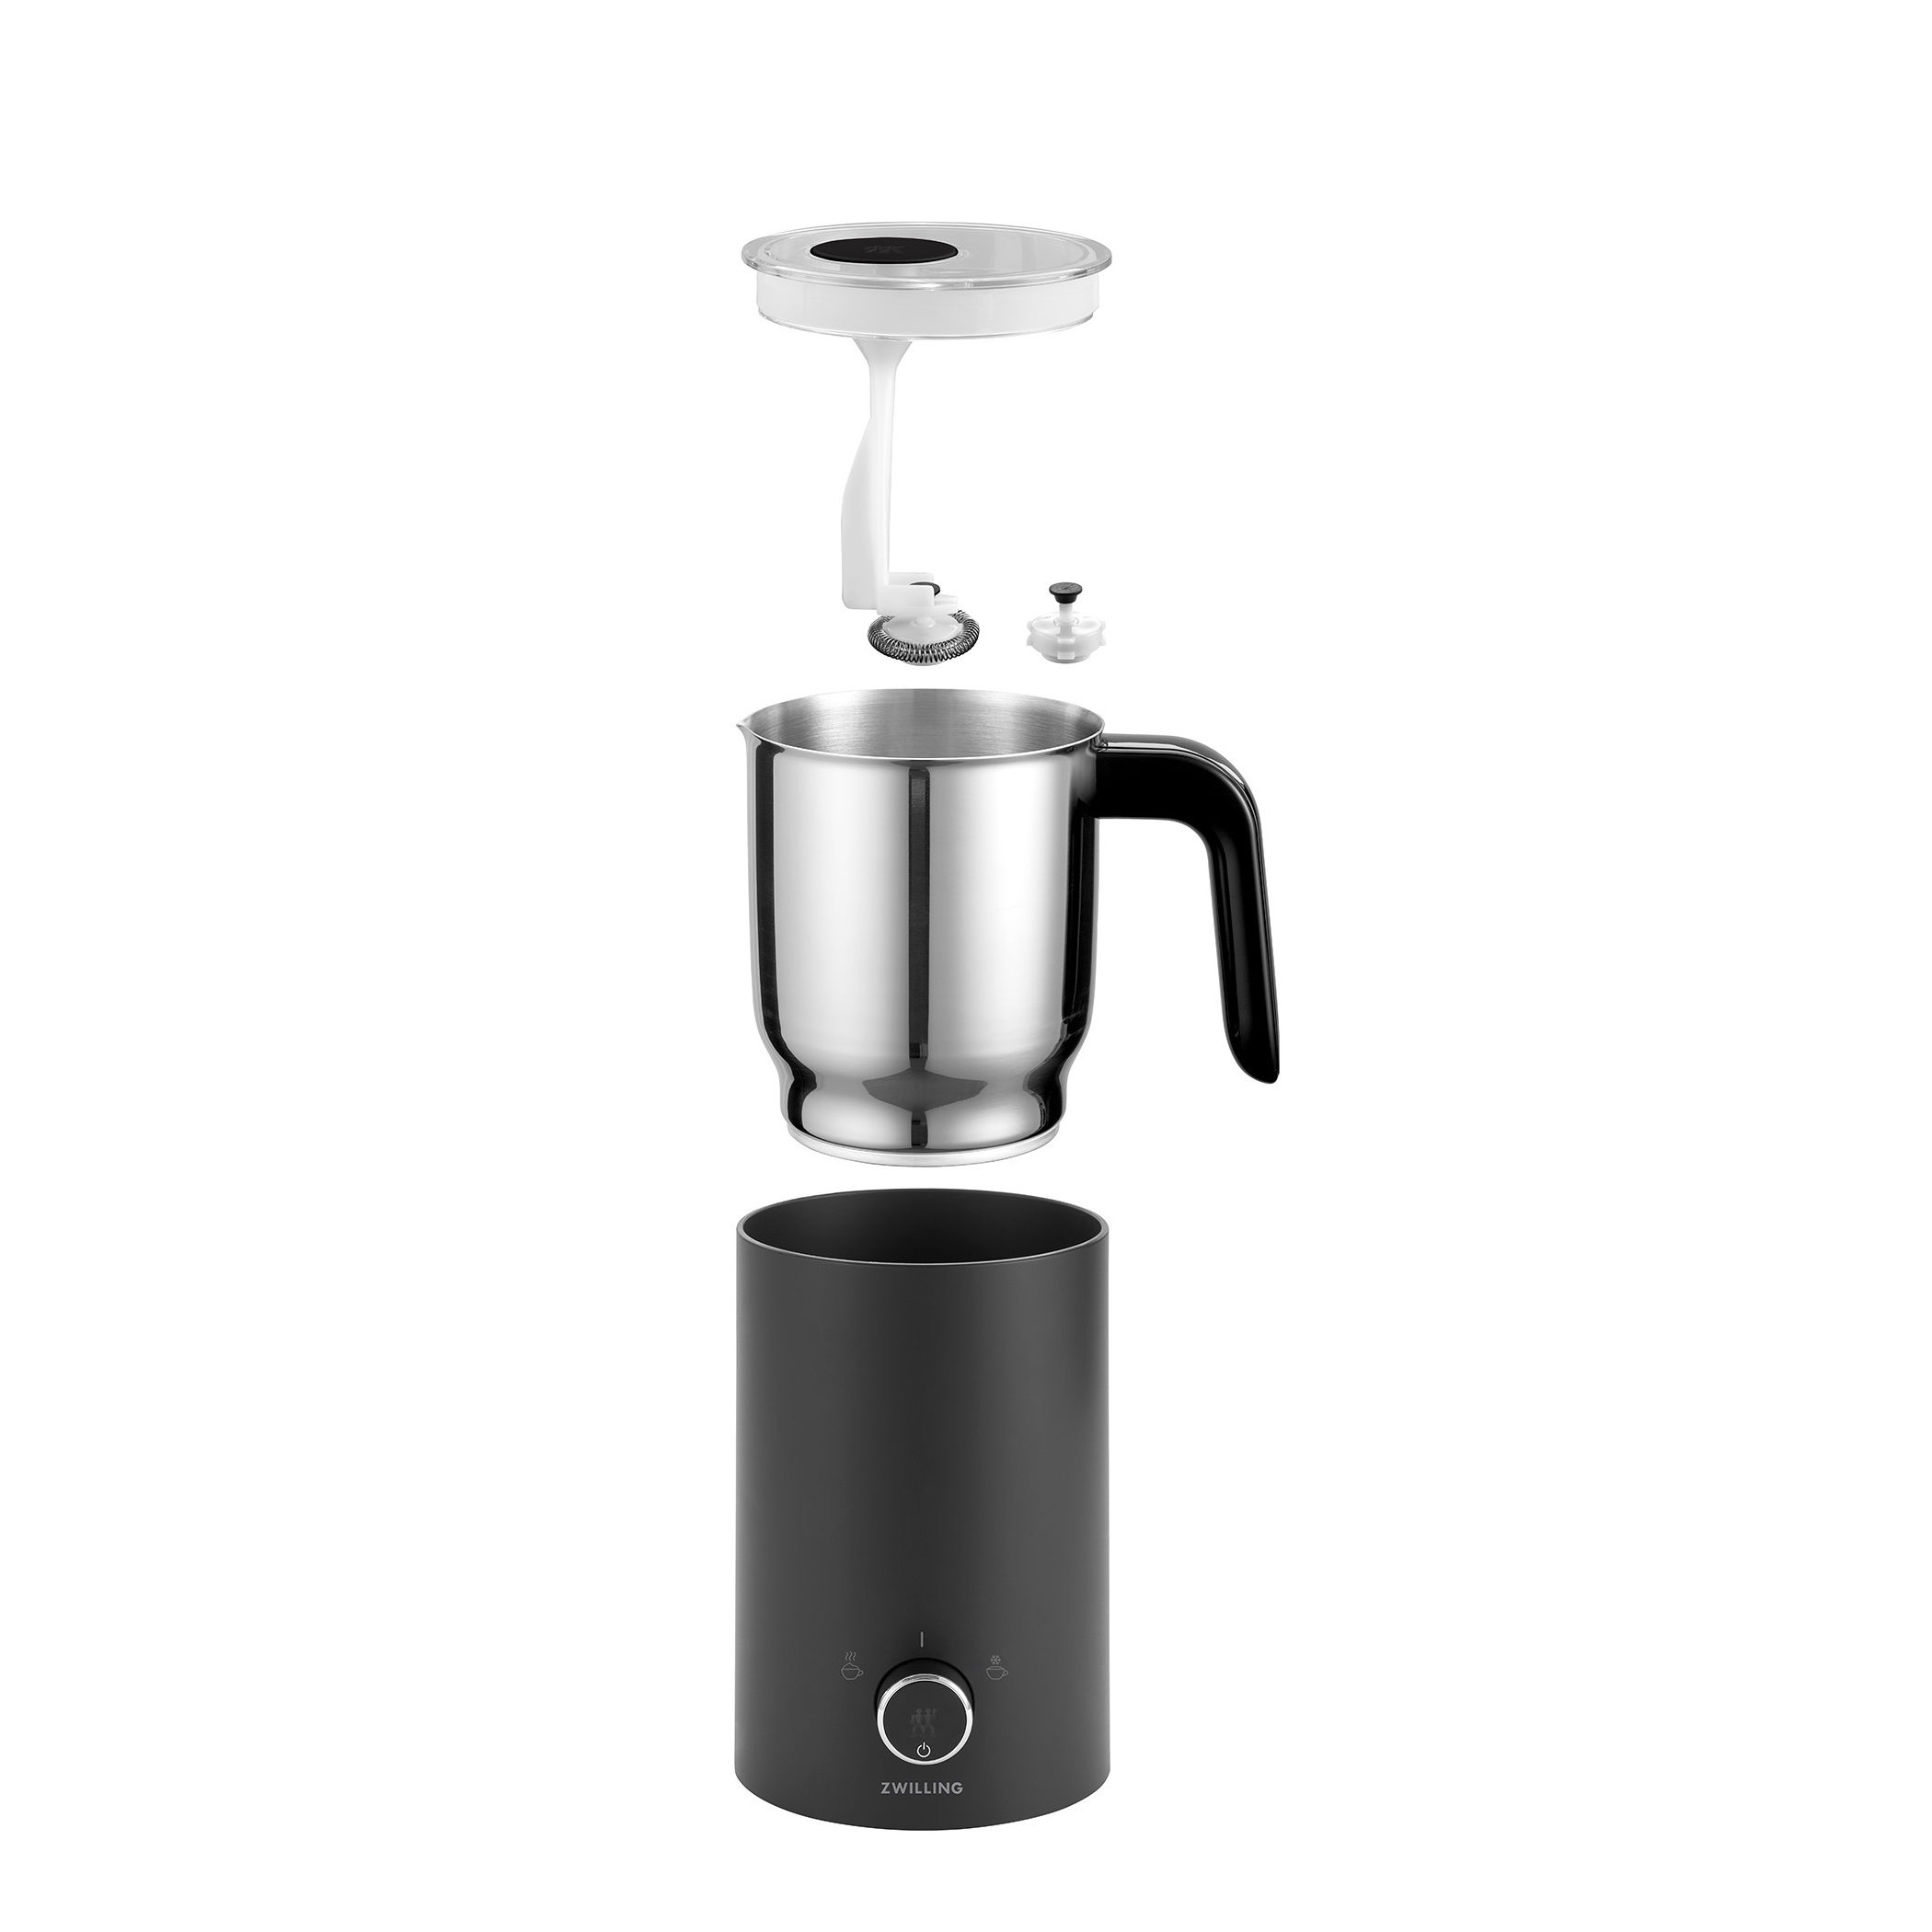 This Highly Rated HadinEEon Milk Frother Is Just $40 on